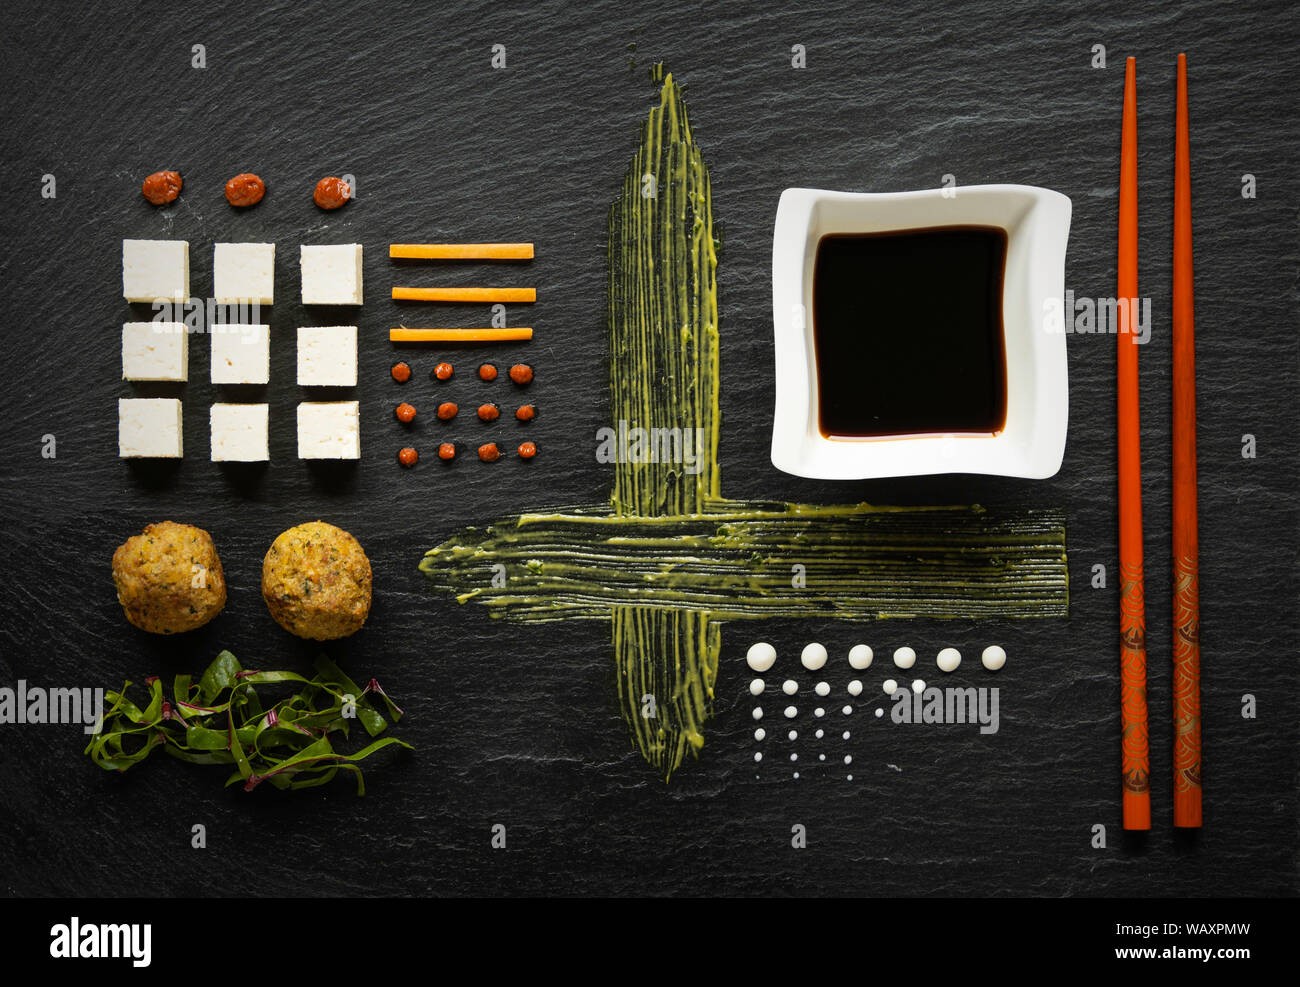 ofu cubes on black stone with sauce, vegetables and falafel, in a modern and geometrical arranged Stock Photo